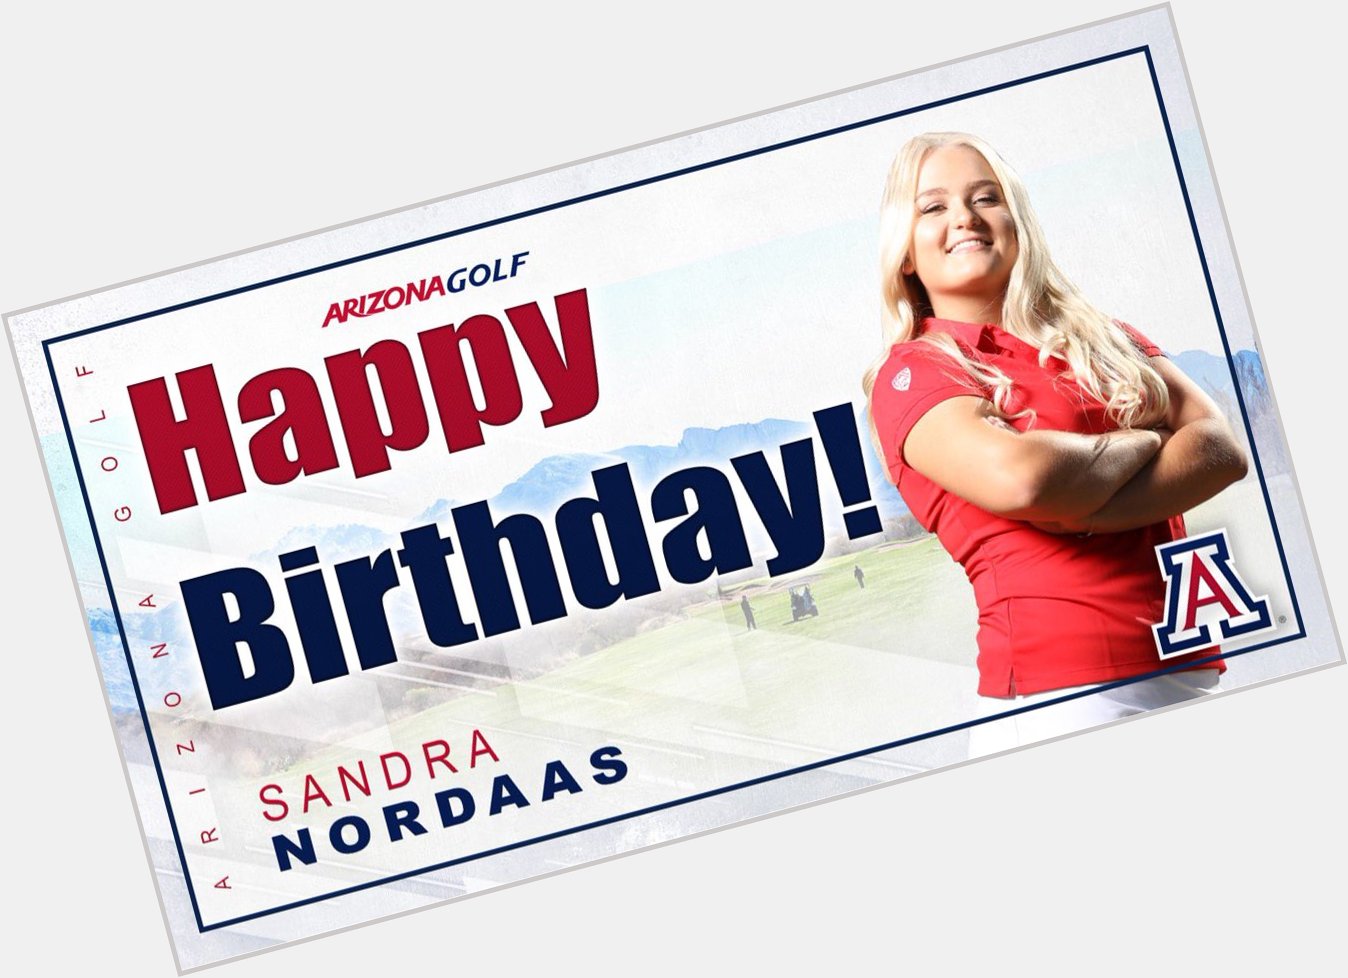 We want to wish a very Happy Birthday to Sandra Nordaas!! 